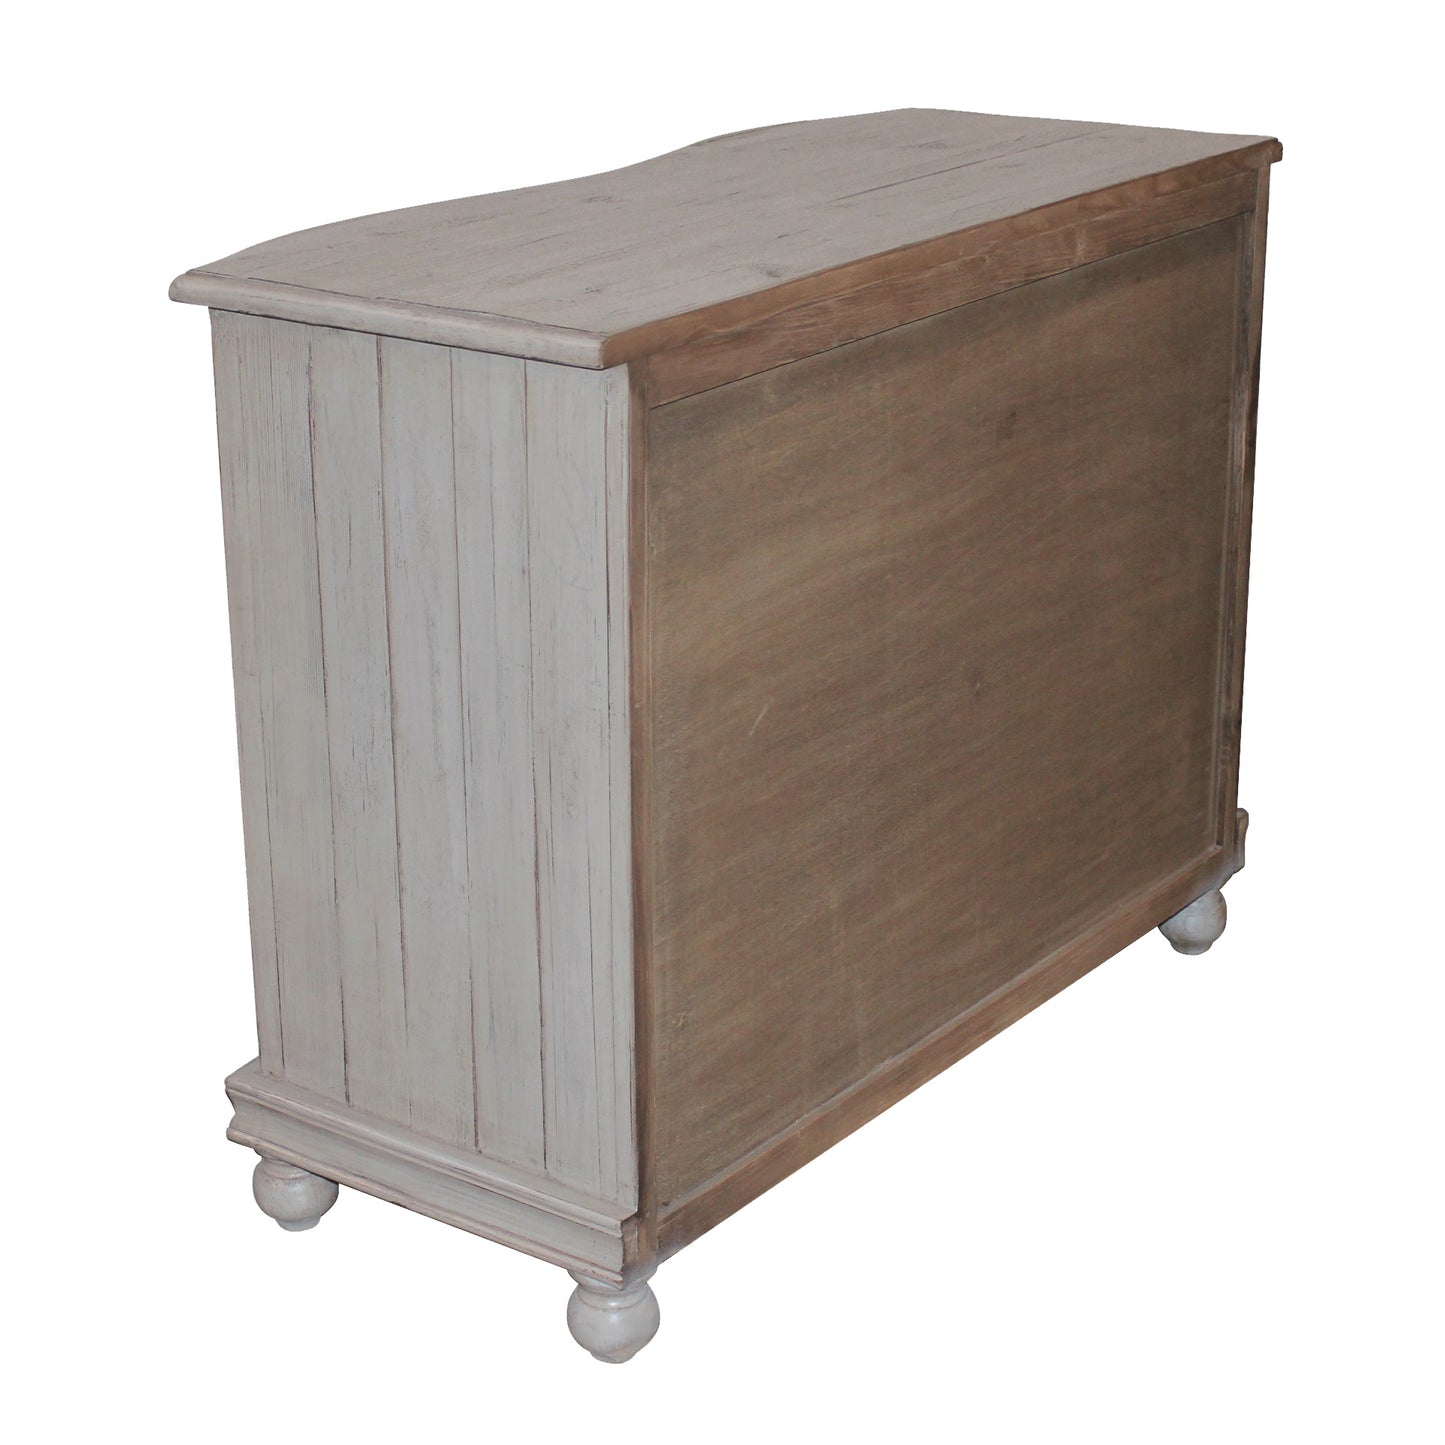 Madelyn 3 Drawer Chest, gray/natural